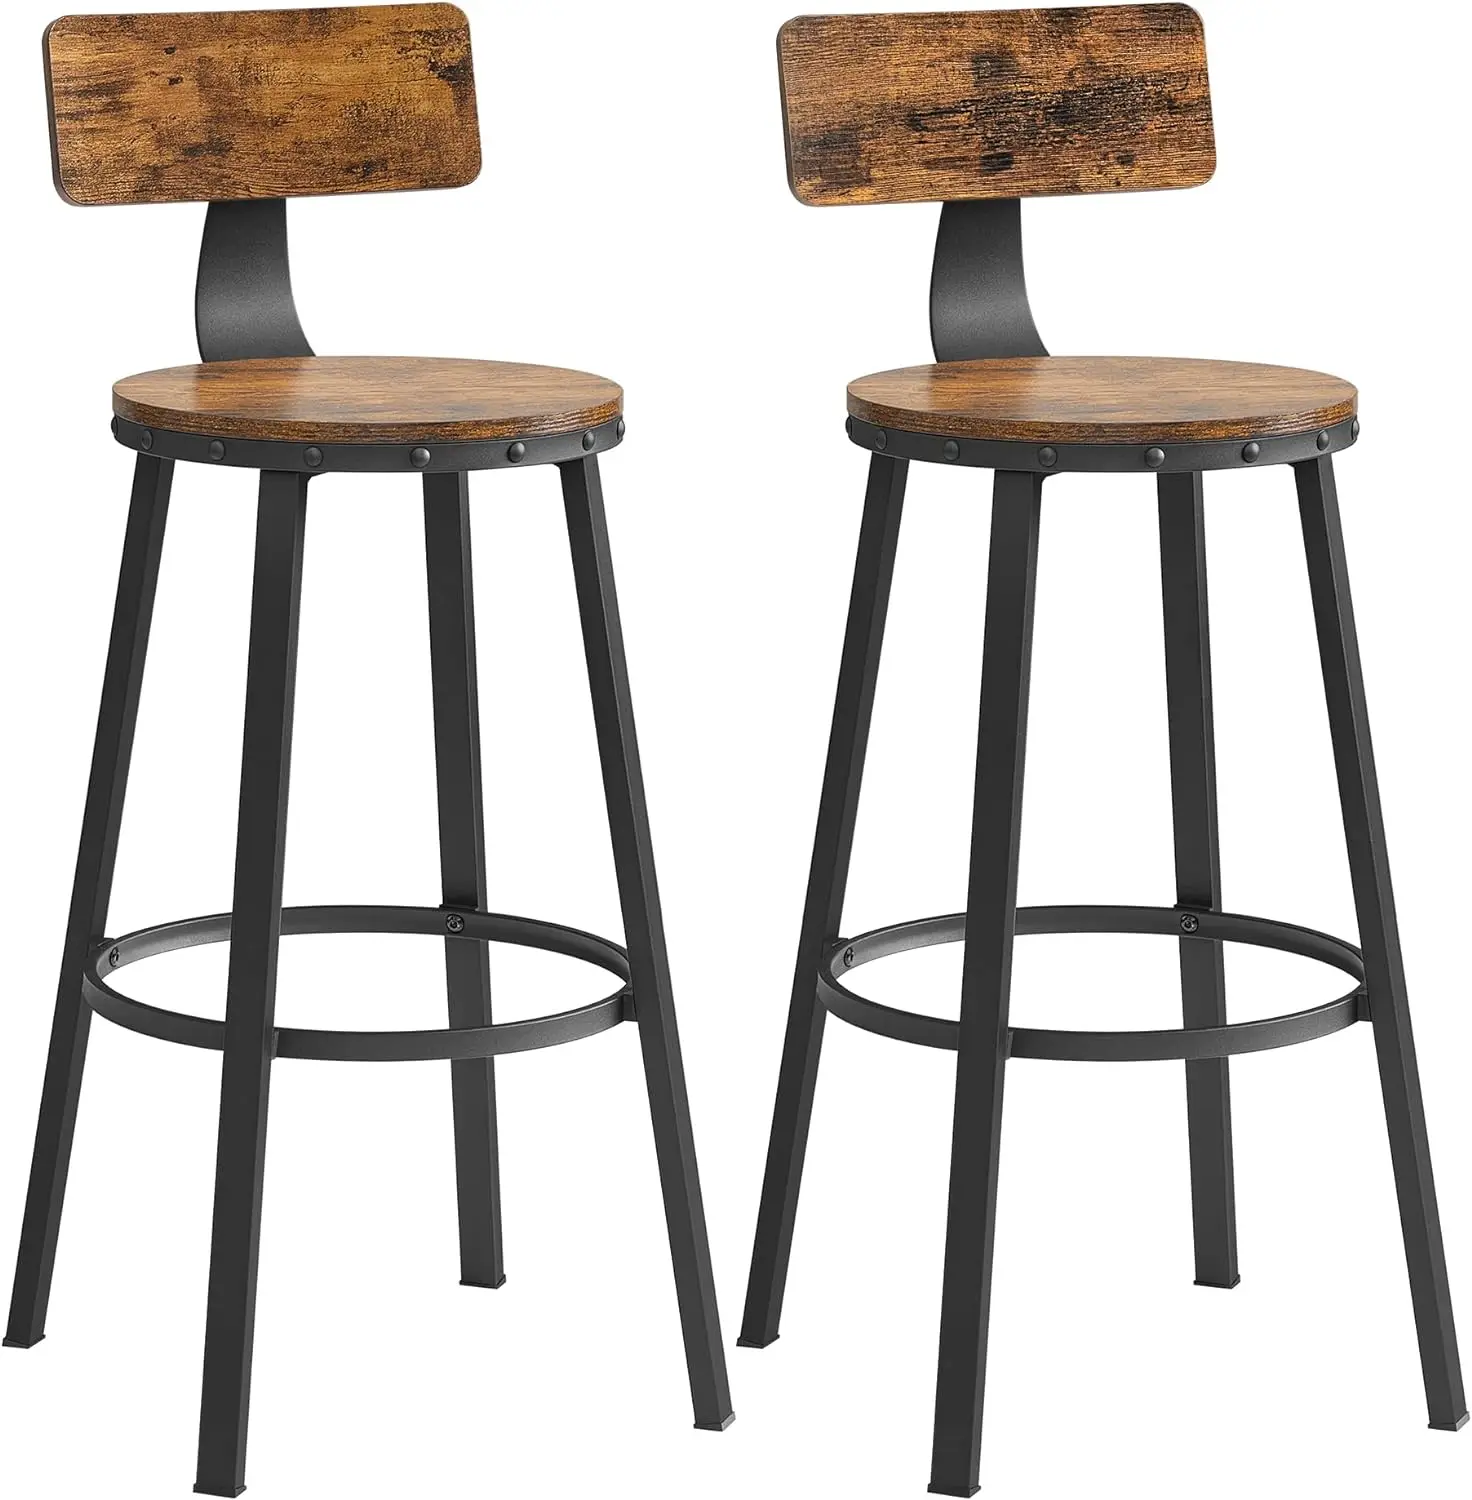 

VASAGLE Bar Stools Set of 2, Bar Height Barstools with Back, Counter Stools Bar Chairs with Backrest, Steel Frame, Easy Assembly